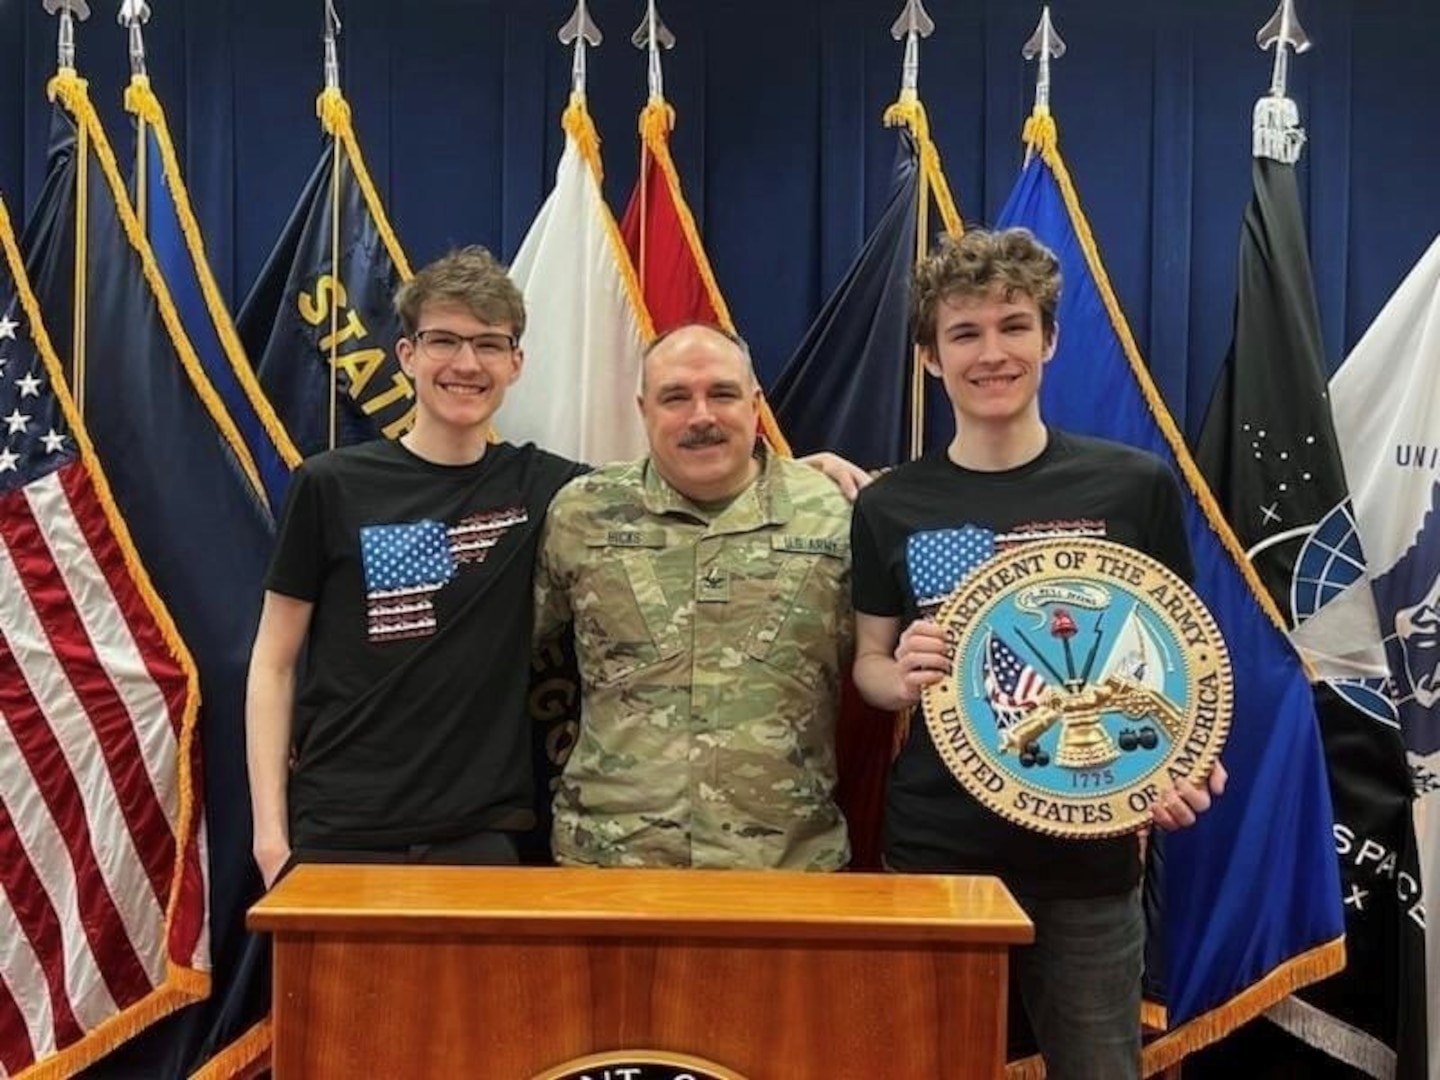 Idaho National Guard Col. Jim Hicks with his 19-year-old sons, Grayson, right, and Riley, Feb. 16, 2023, shortly after Hicks enlisted his sons into the Idaho Army National Guard at the Idaho Military Entrance Processing Station in Boise. The twins will serve in the same unit and military occupational specialty.